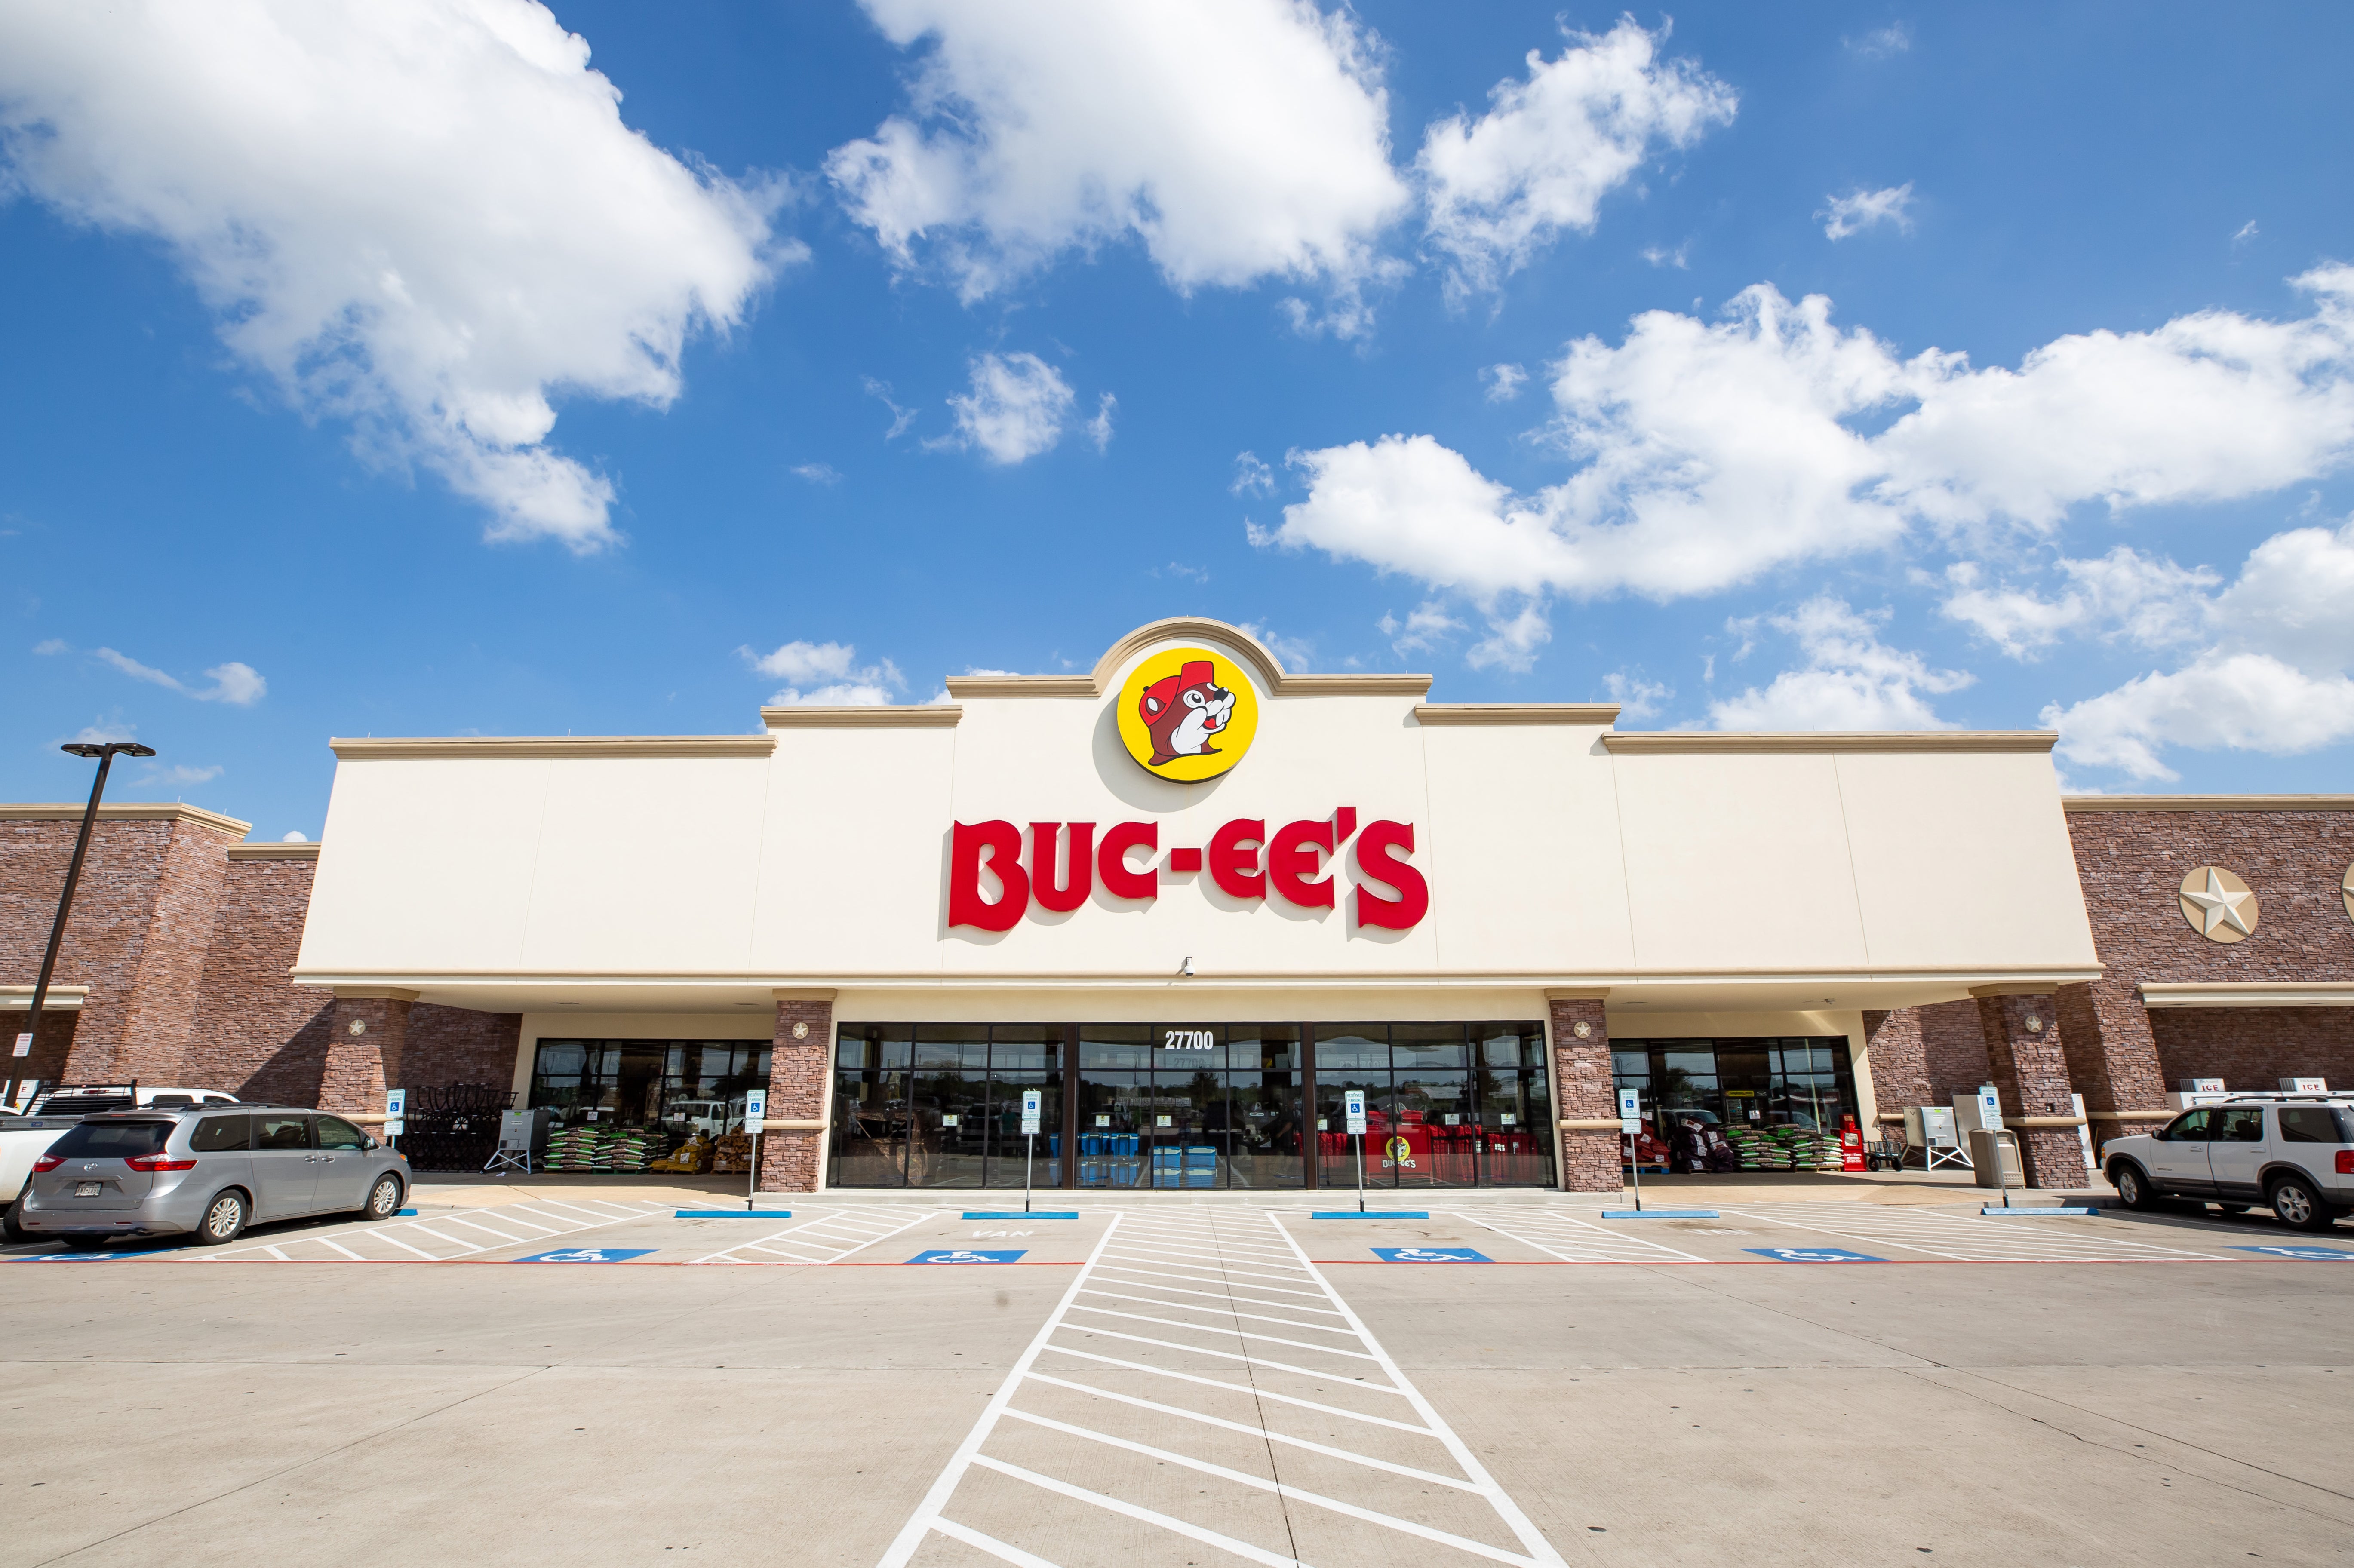 Buc-ee’s is a chain of gas and travel centers that began in Texas and are spreading across the US